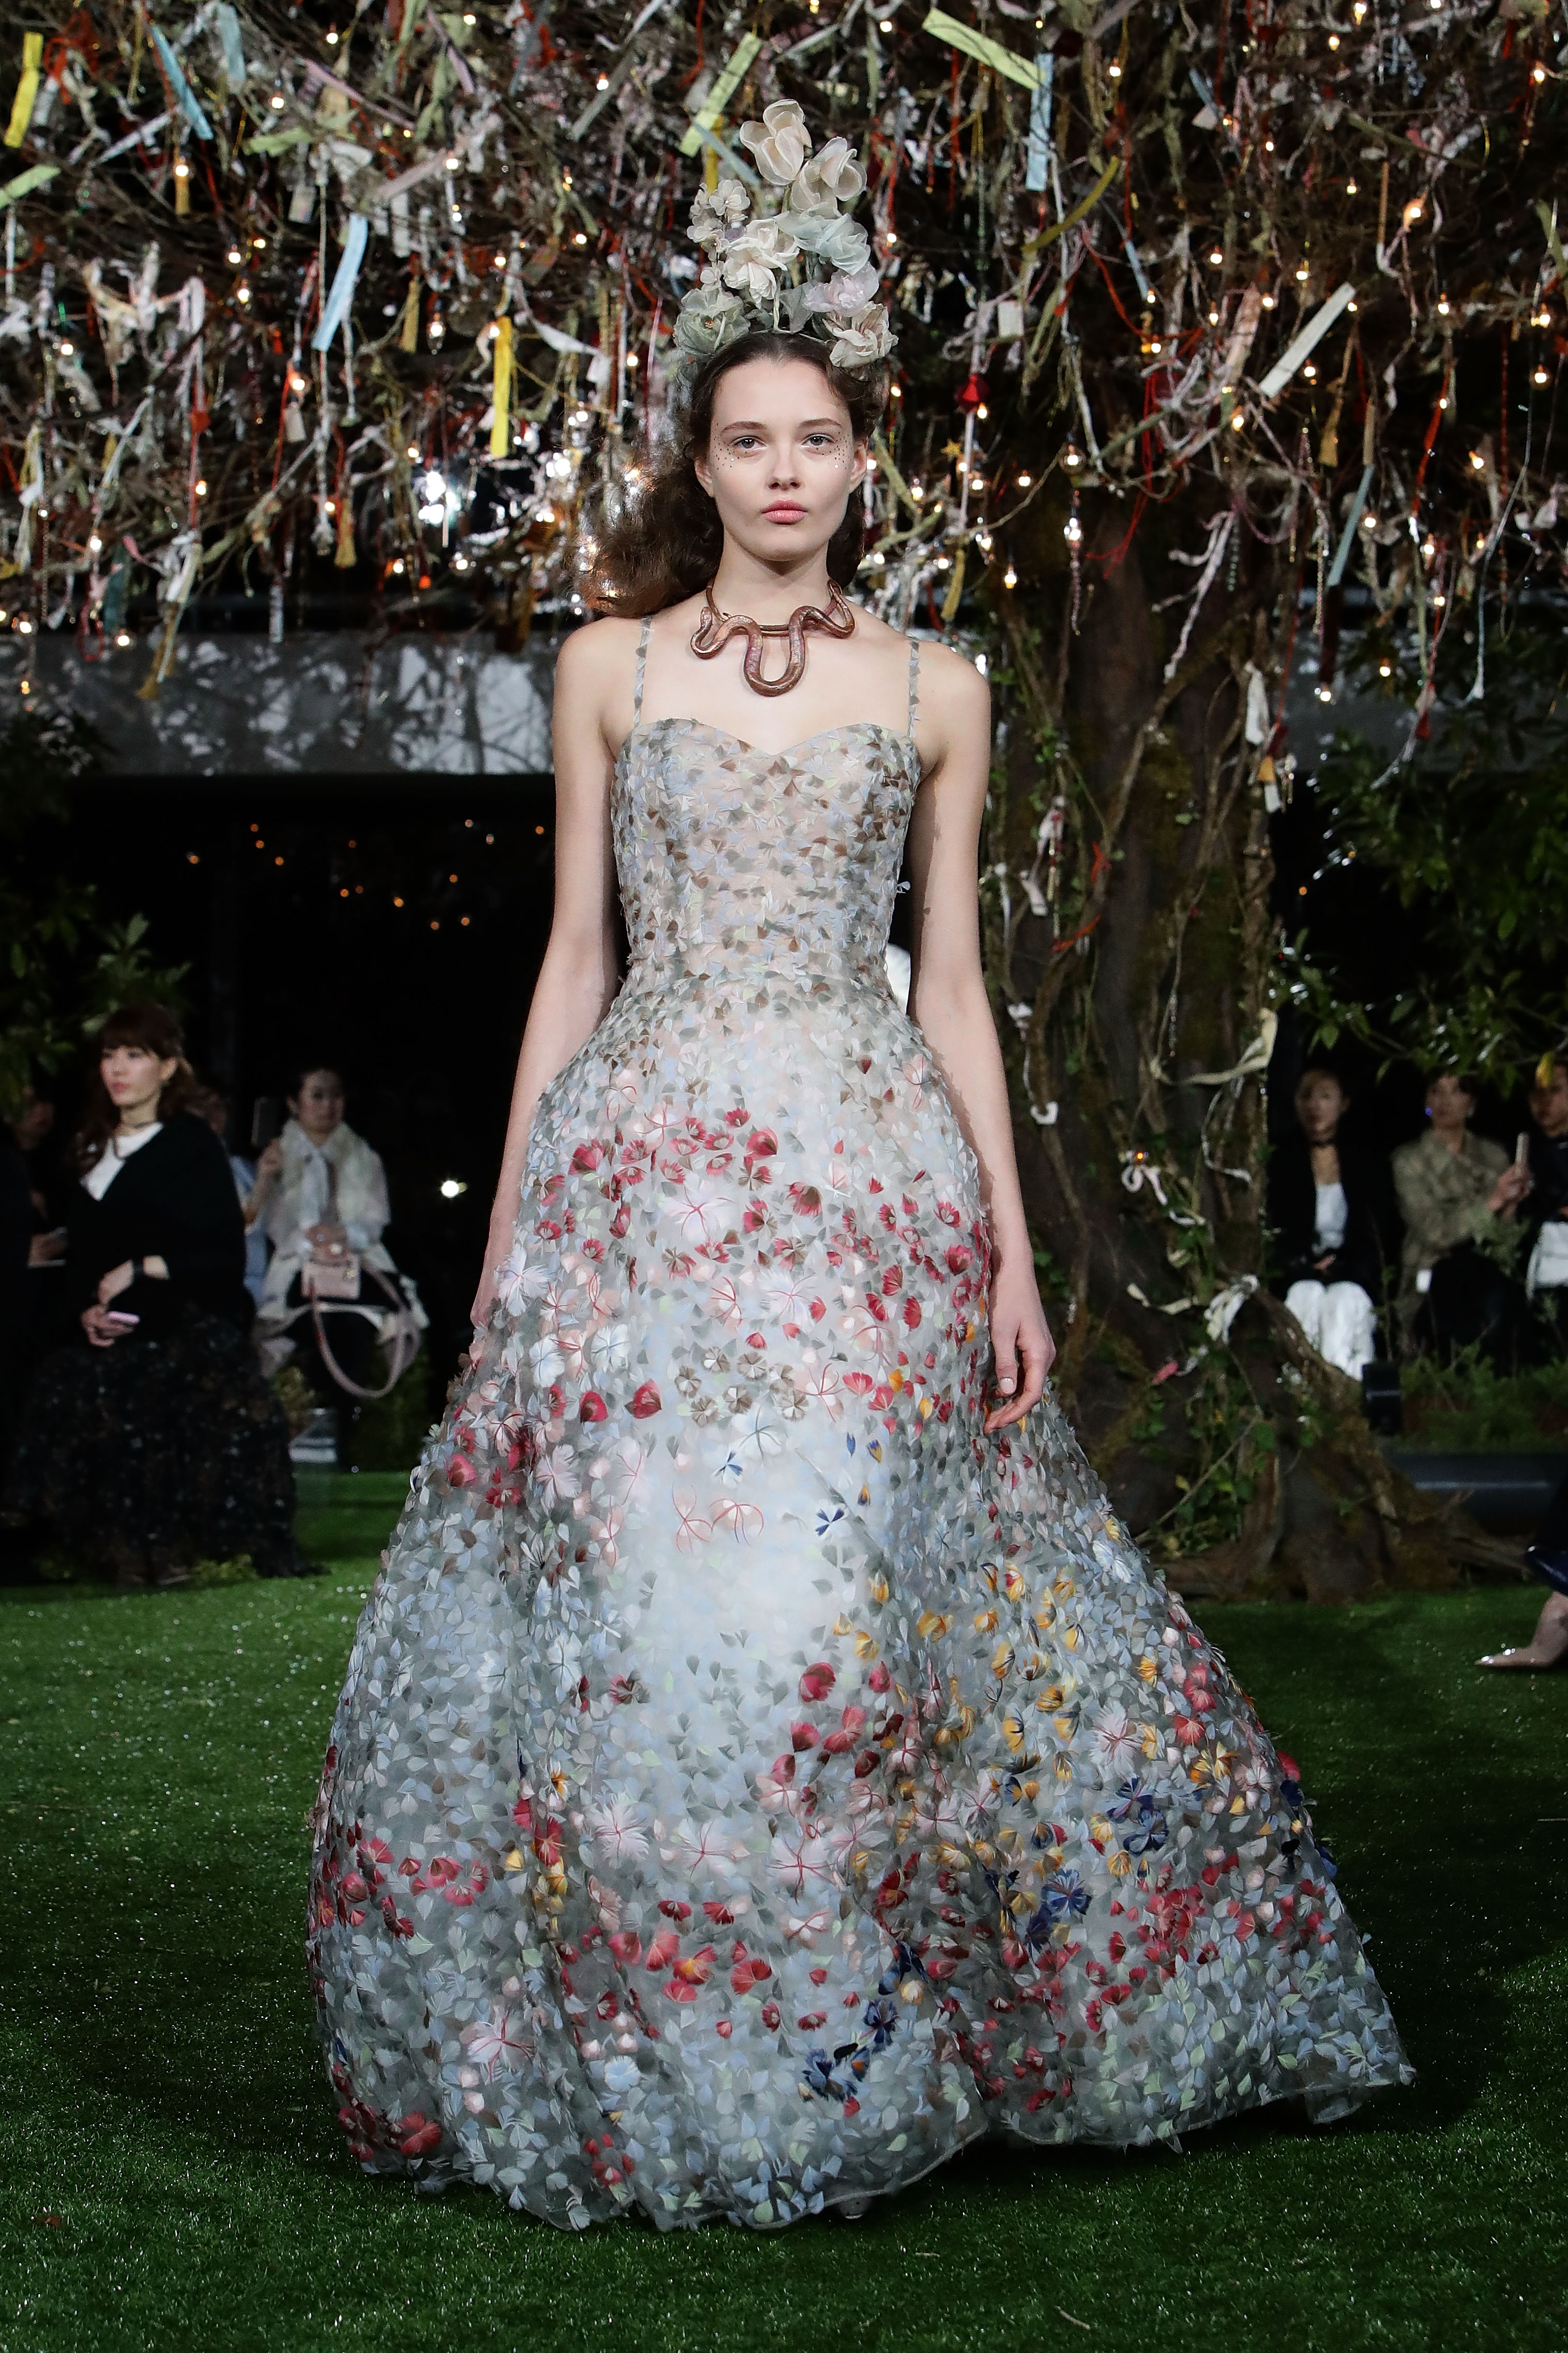 Dior Haute Couture Cherry Blossom Gowns in Tokyo, Japan - Dior Couture Show  Tokyo Japan